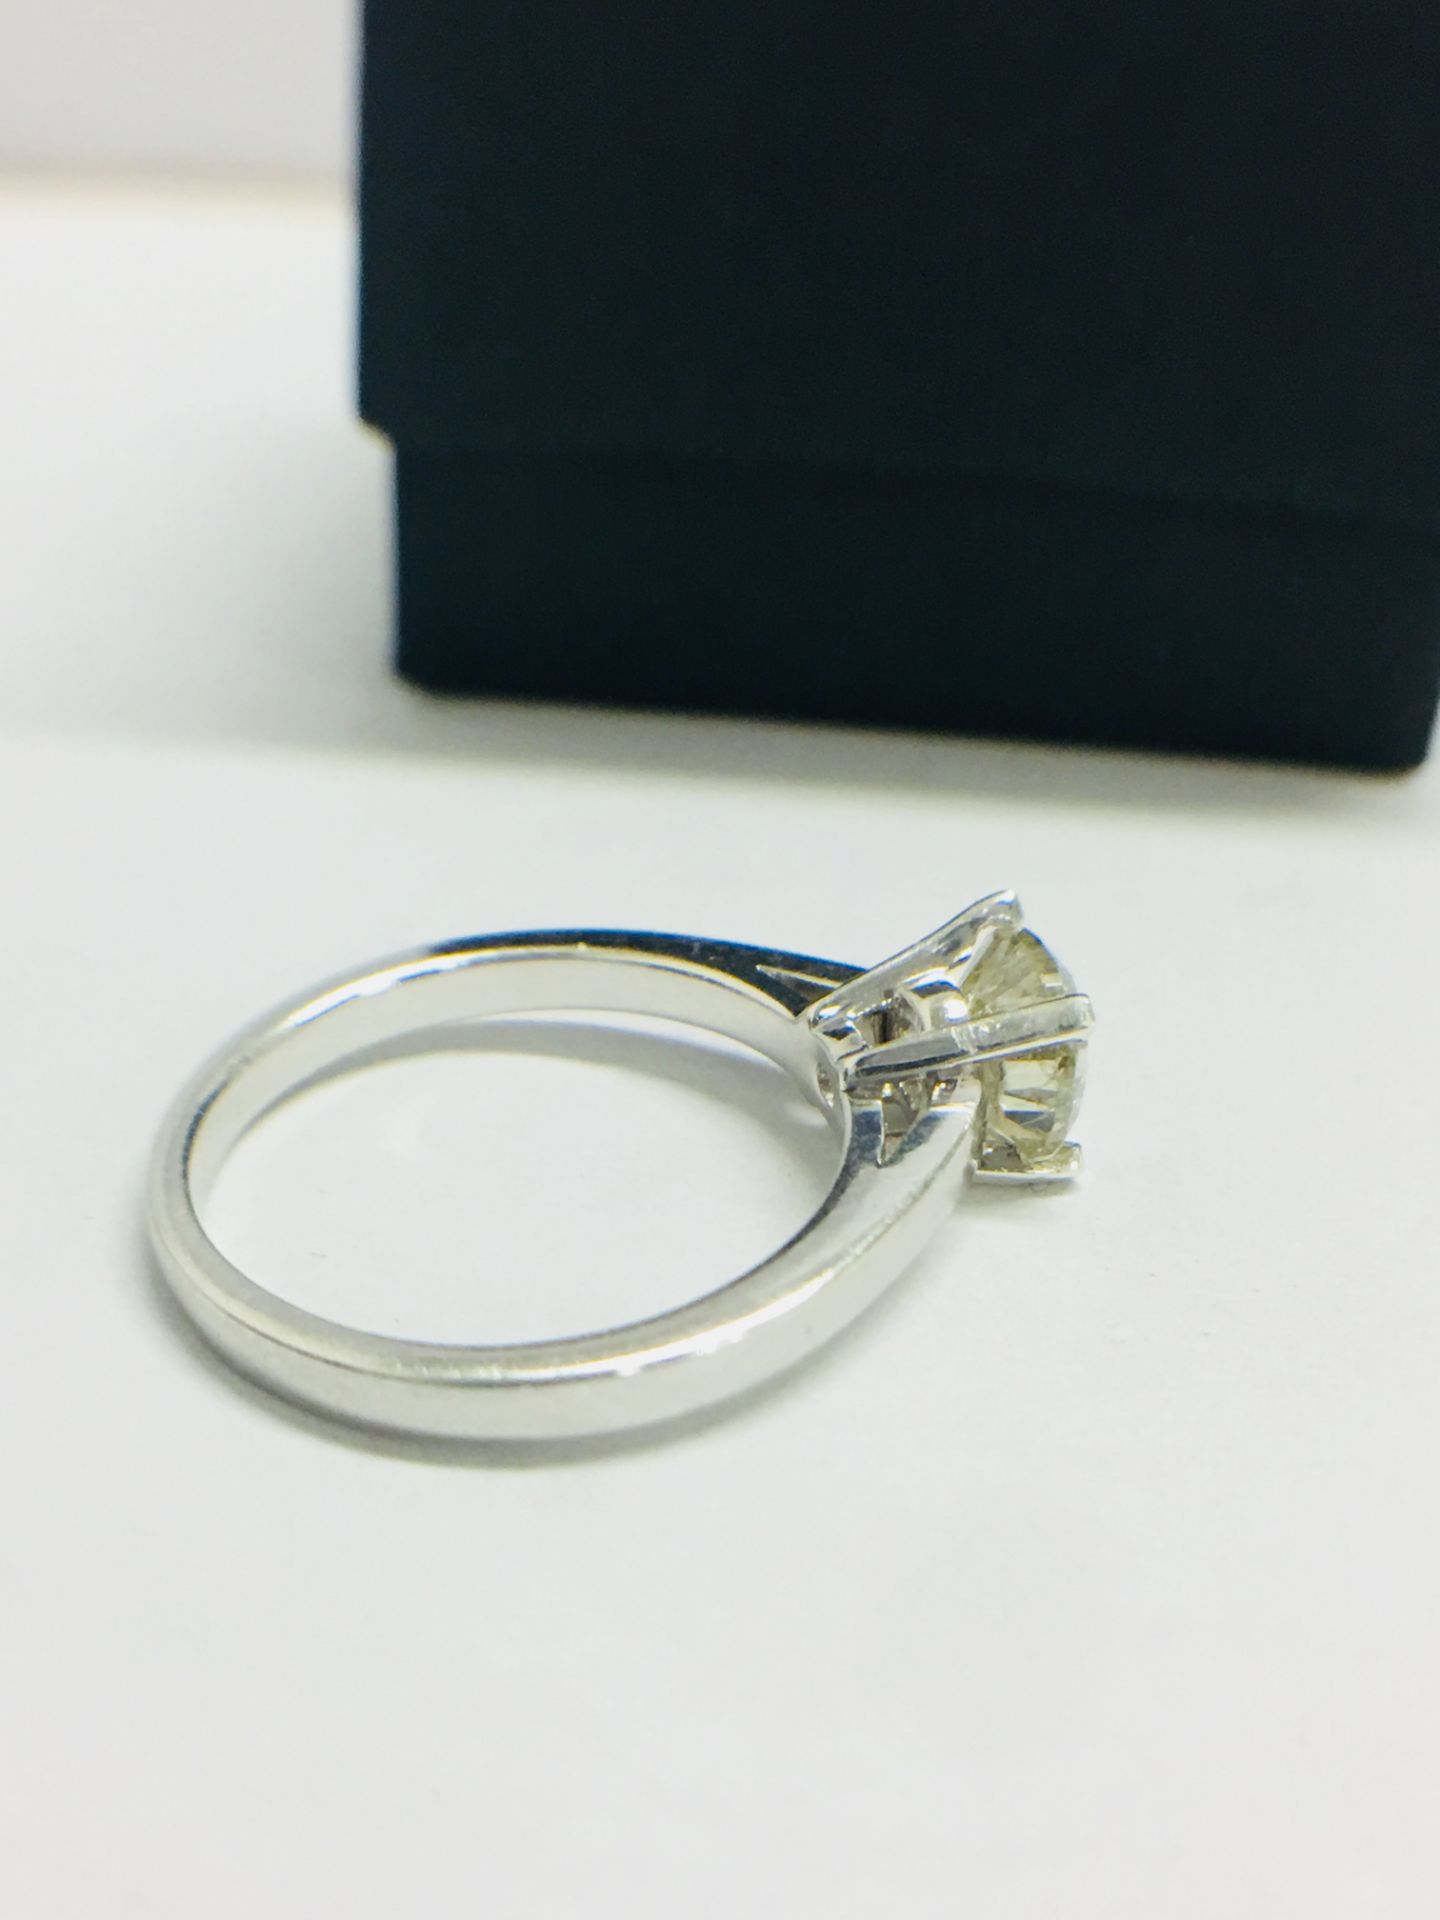 1.23Ct Diamond Solitaire Ring With A Brilliant Cut Diamond. - Image 6 of 8